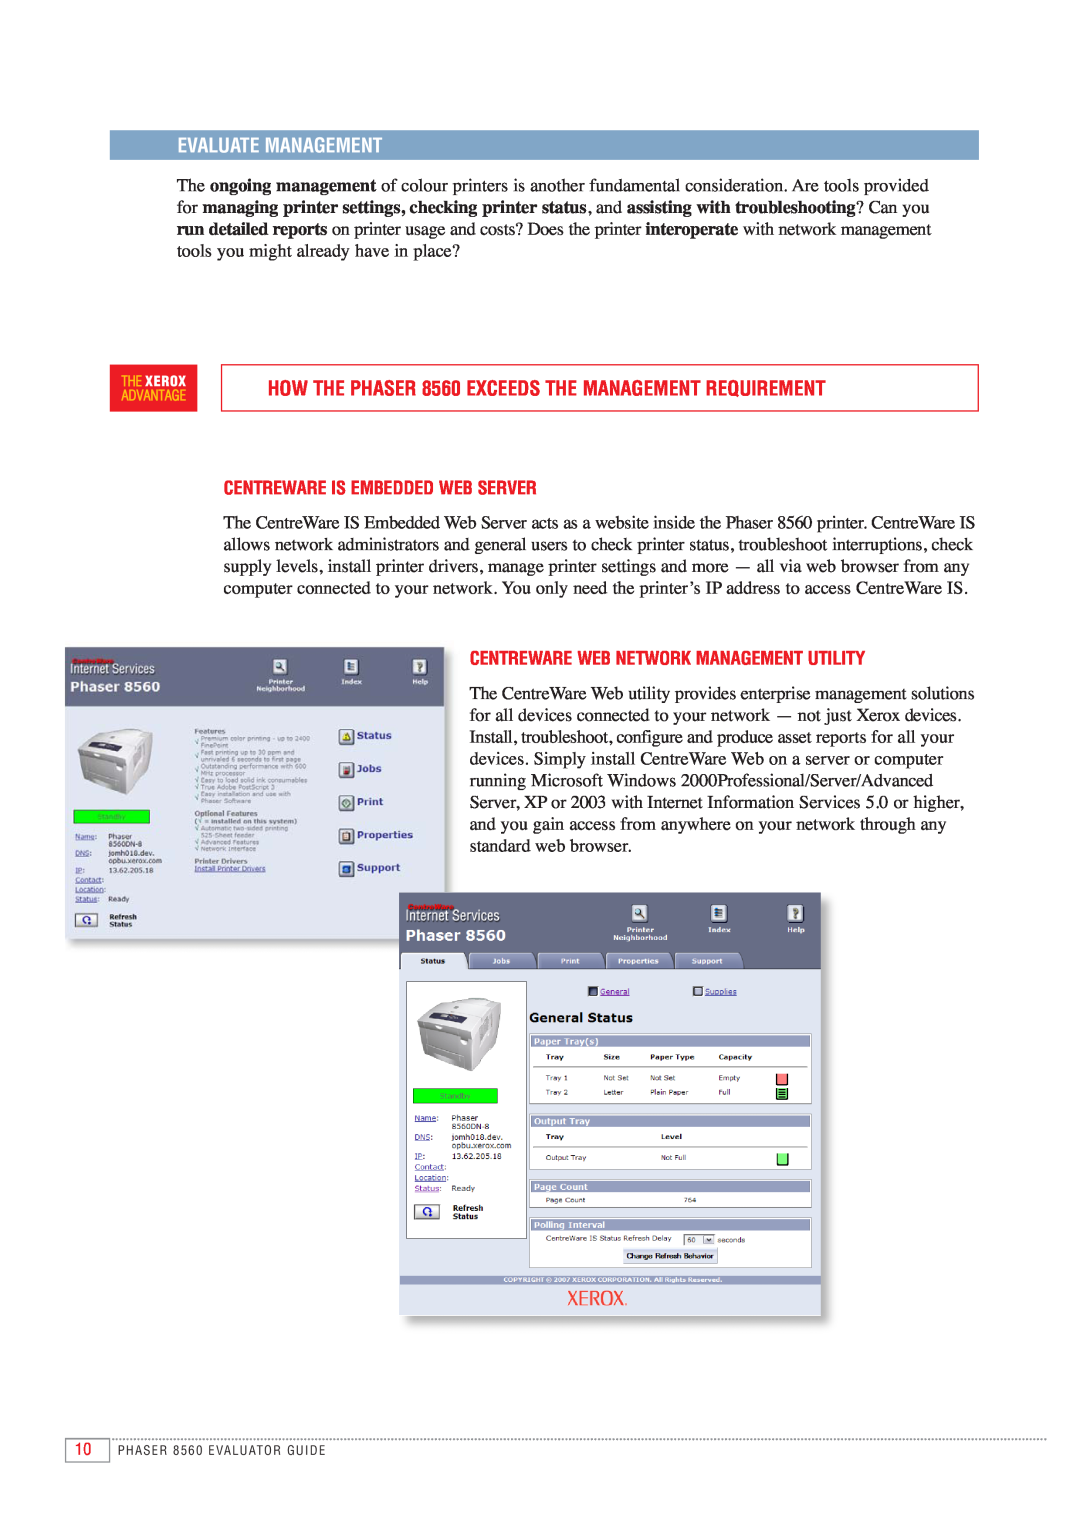 Xerox Evaluate Management, HOW THE PHASER 8560 EXCEEDS THE MANAGEMENT REQUIREMENT, Centreware Is Embedded Web Server 